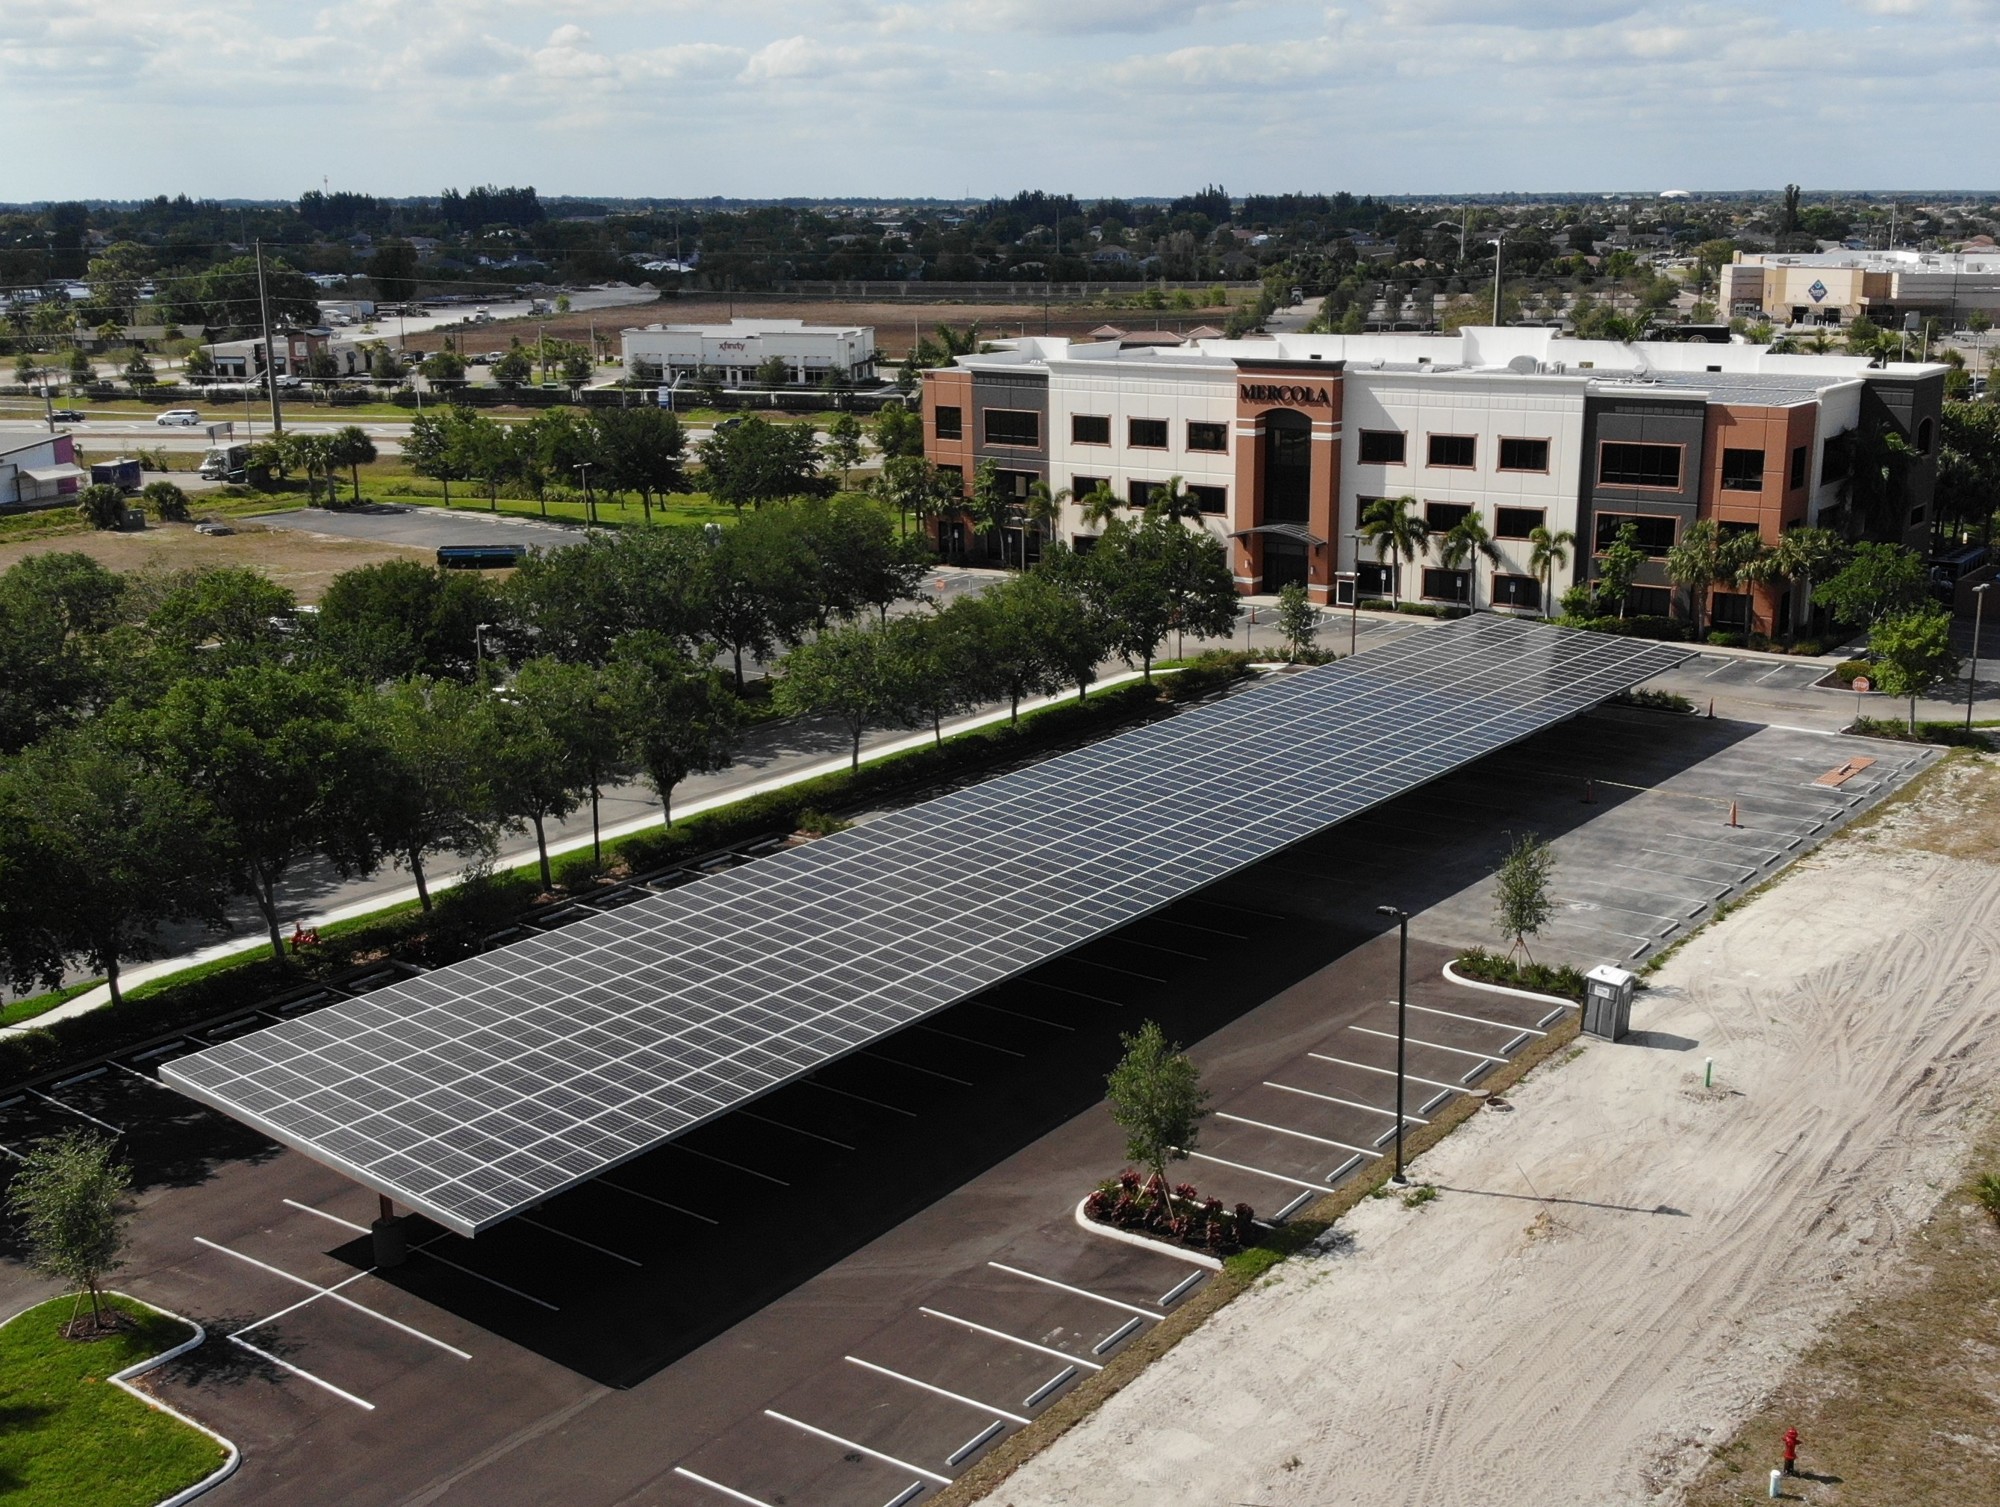 Mercola installed more than $1 million worth of solar panels. (Courtesy.)